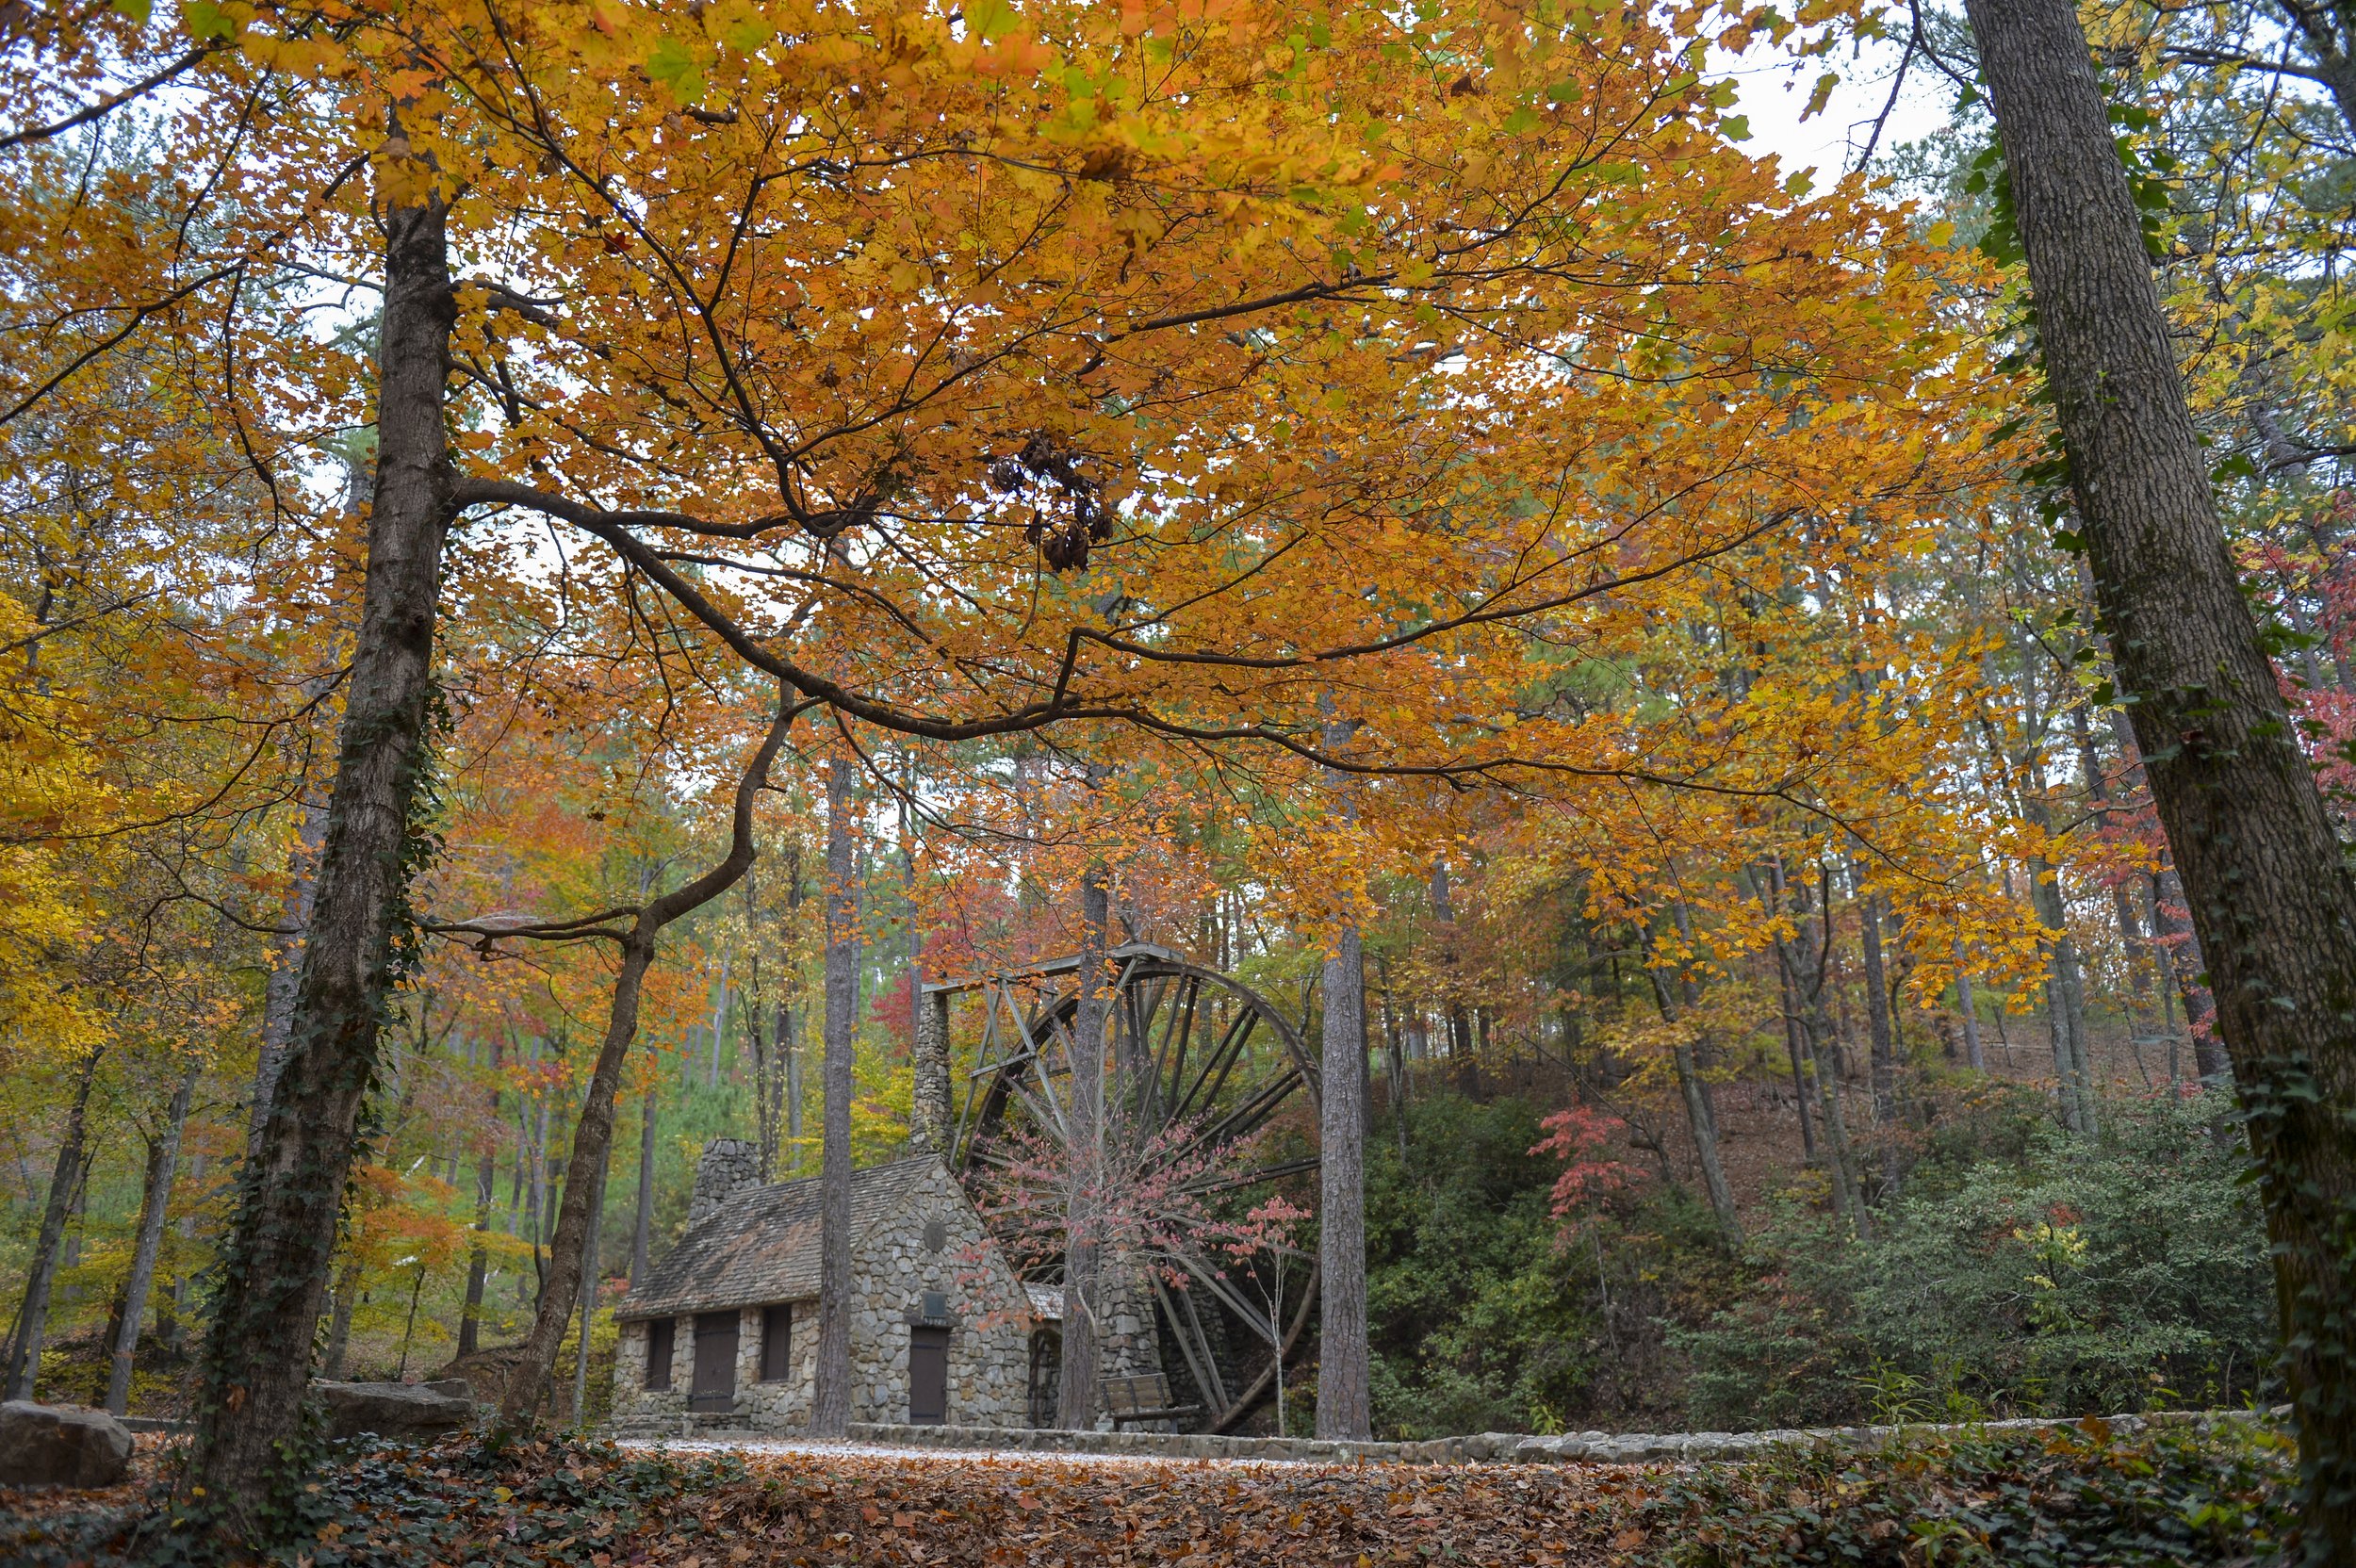 201110 G33550 Old Mill Fall Colors 28136 BS1.jpg